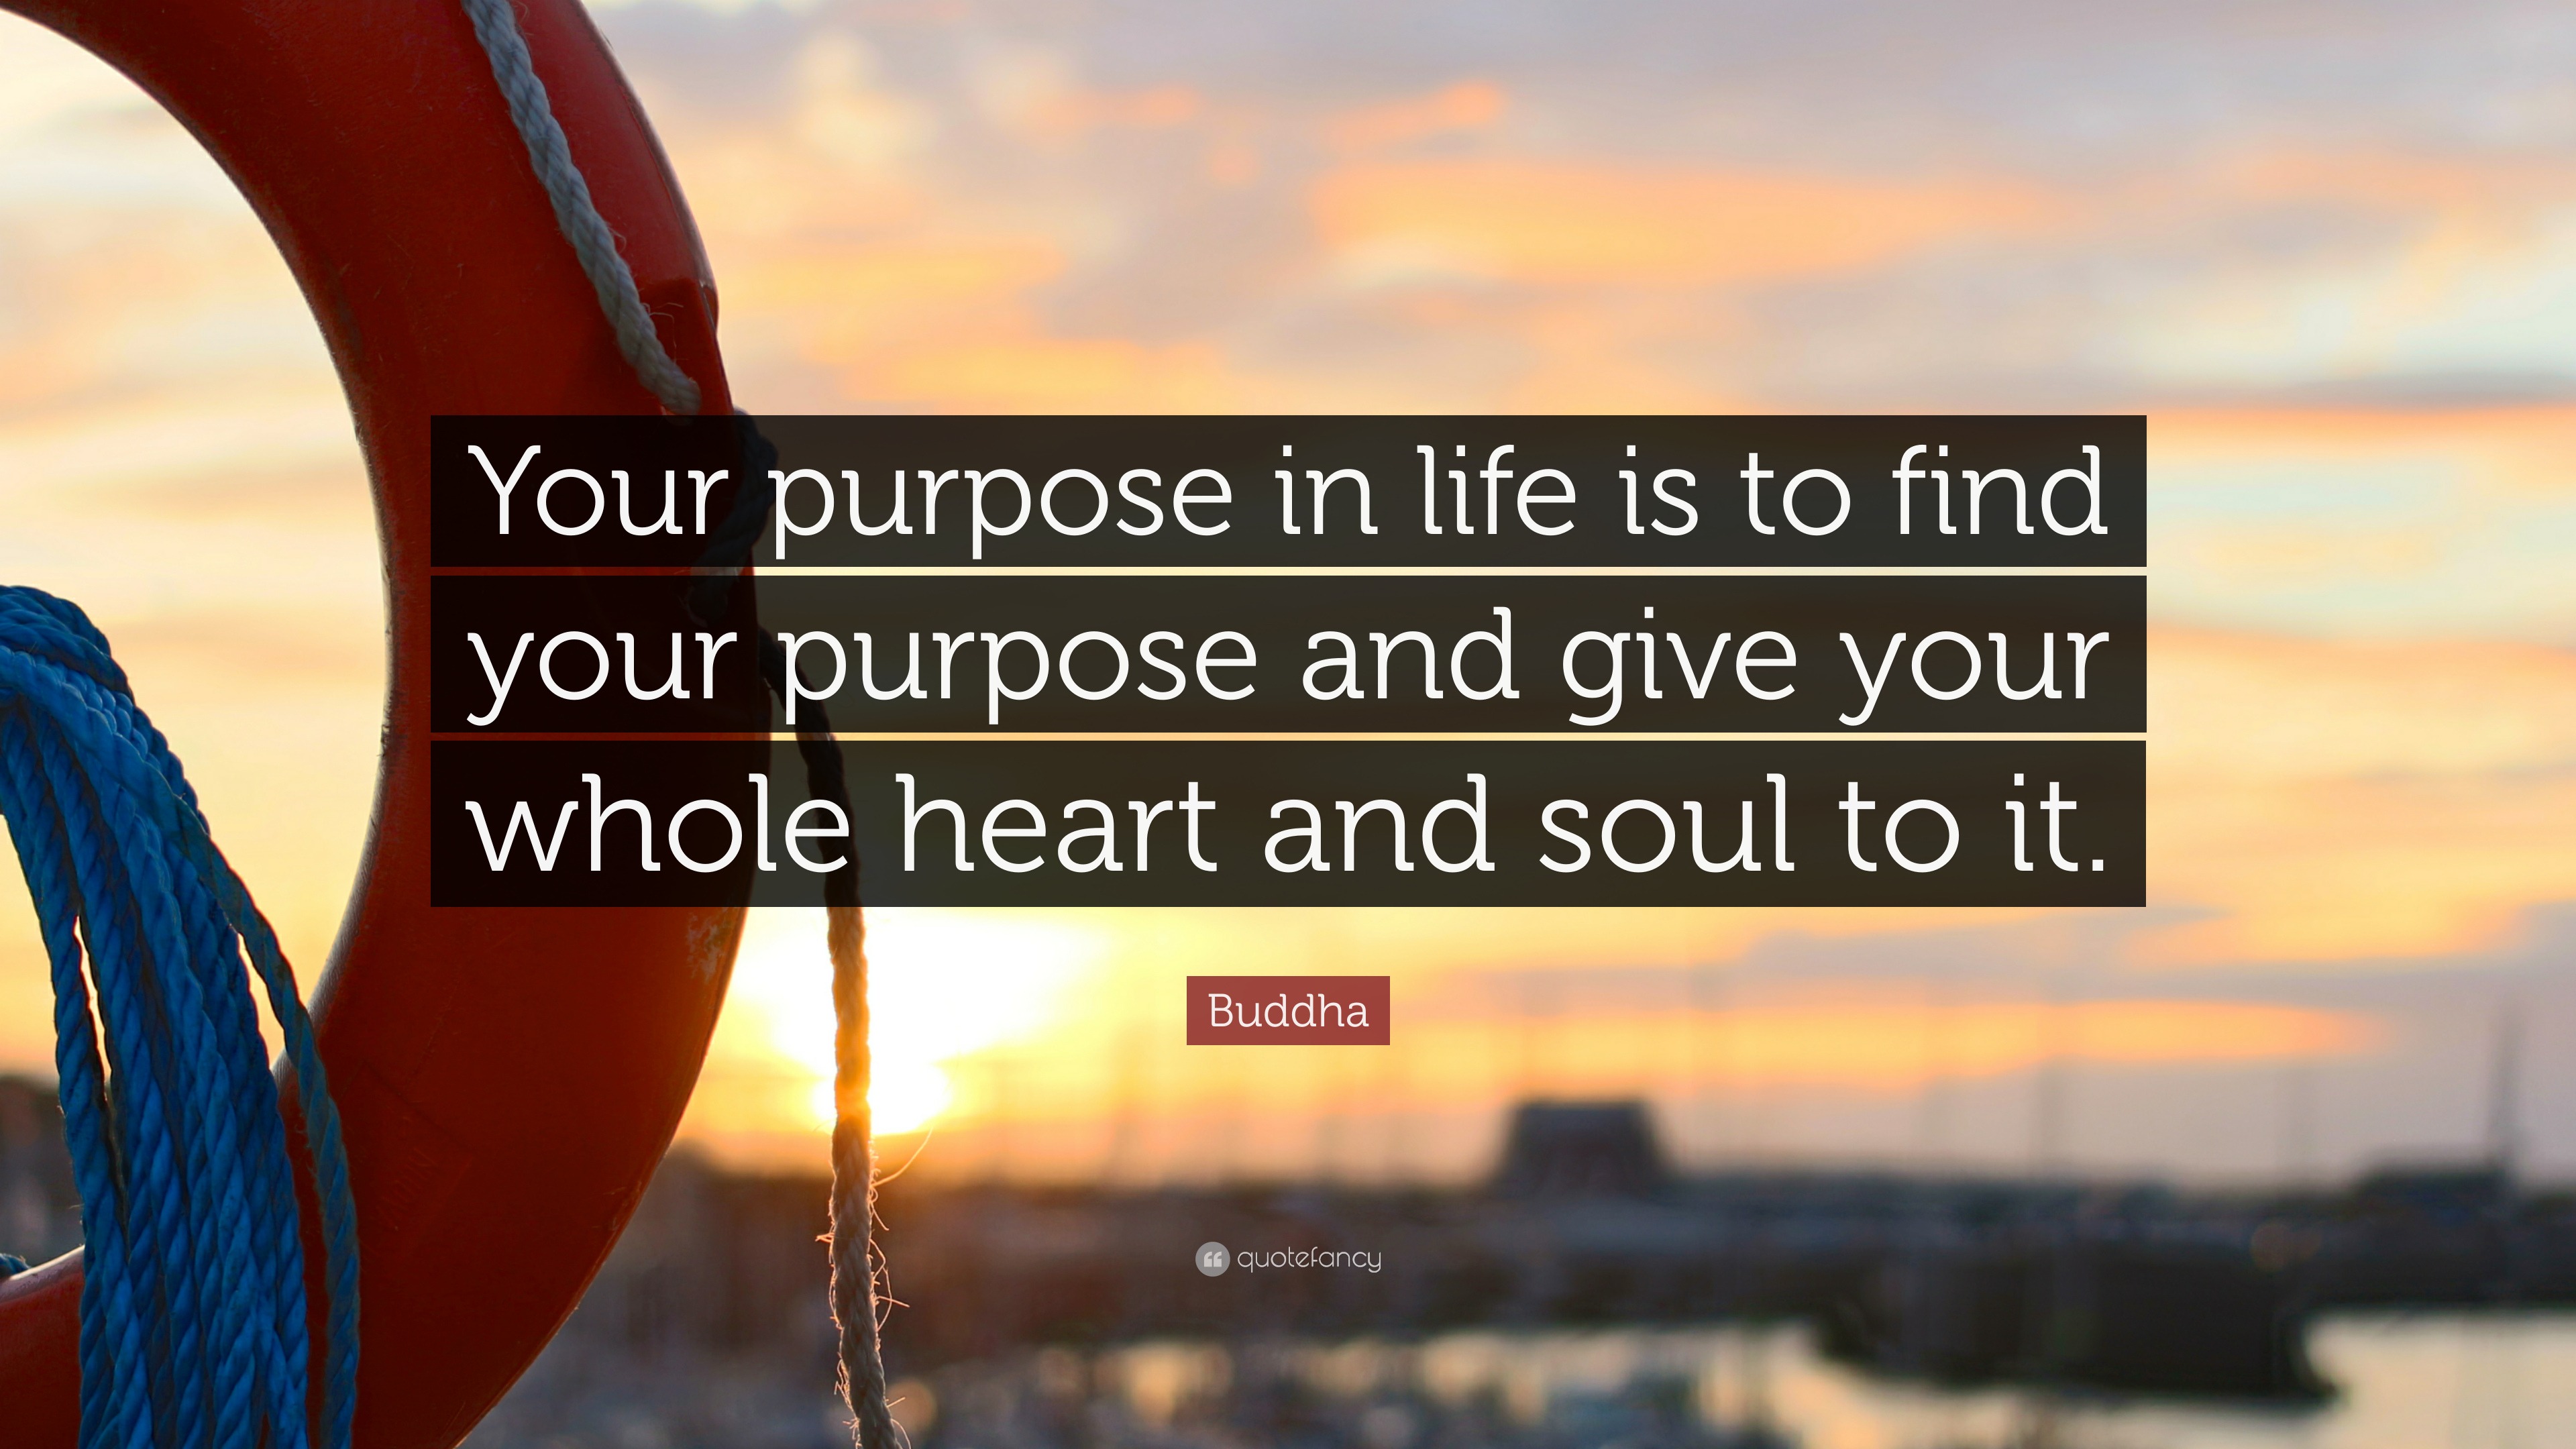 Buddha Quote “Your purpose in life is to find your purpose and give your